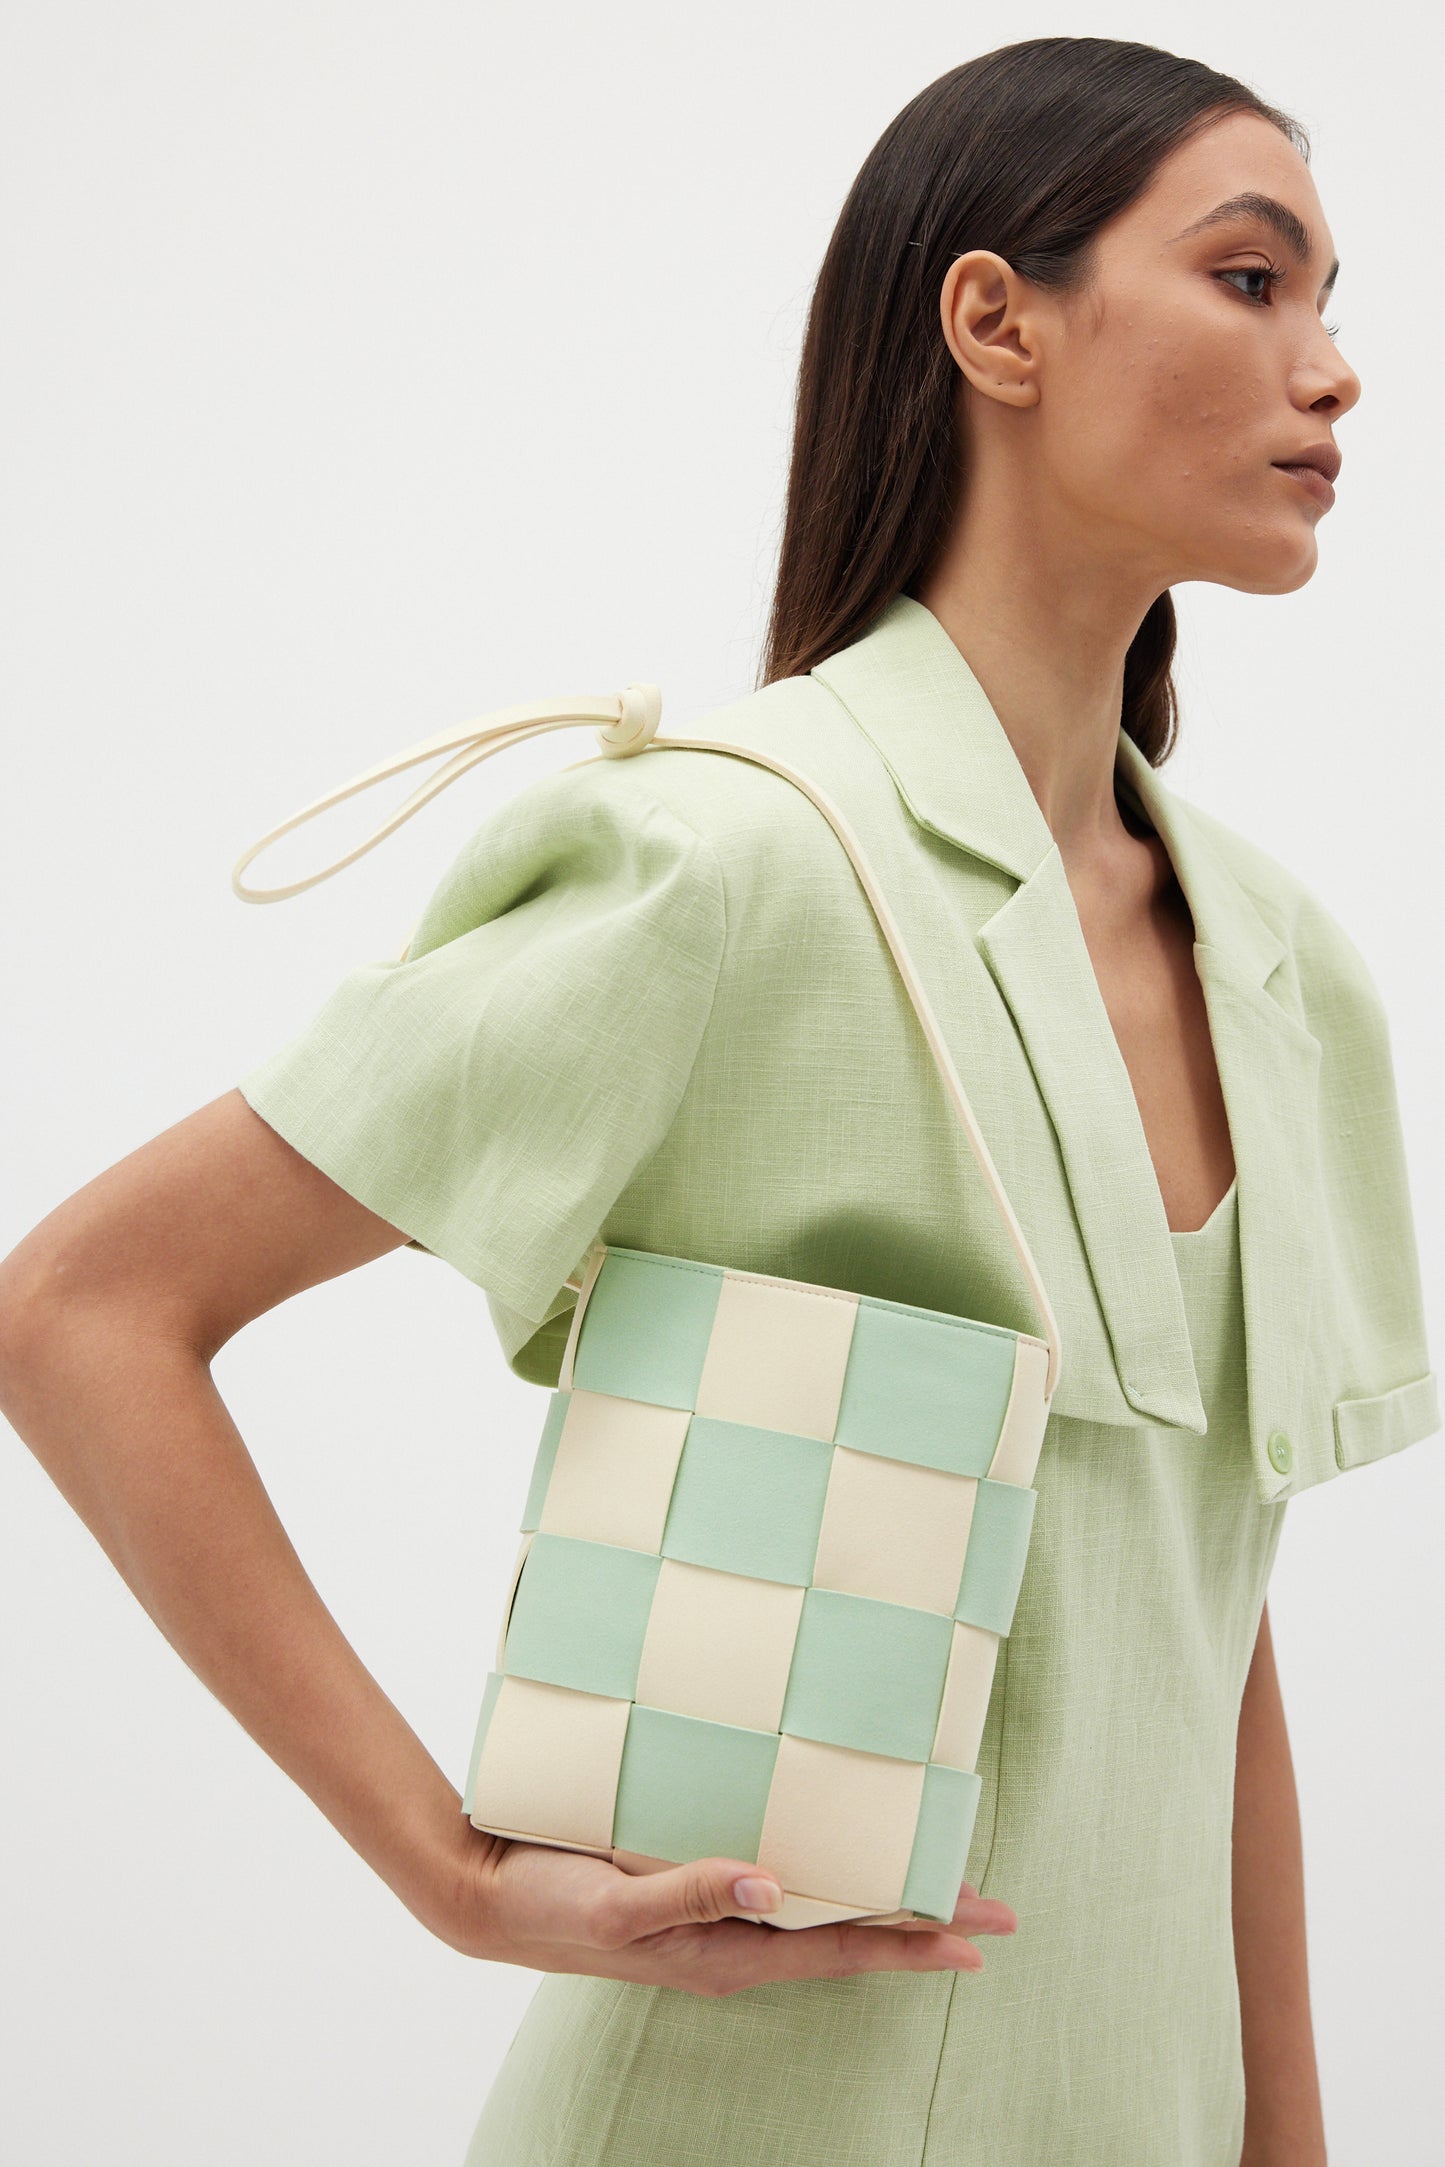 Checkered Weave Leather Bag, Pastel Green